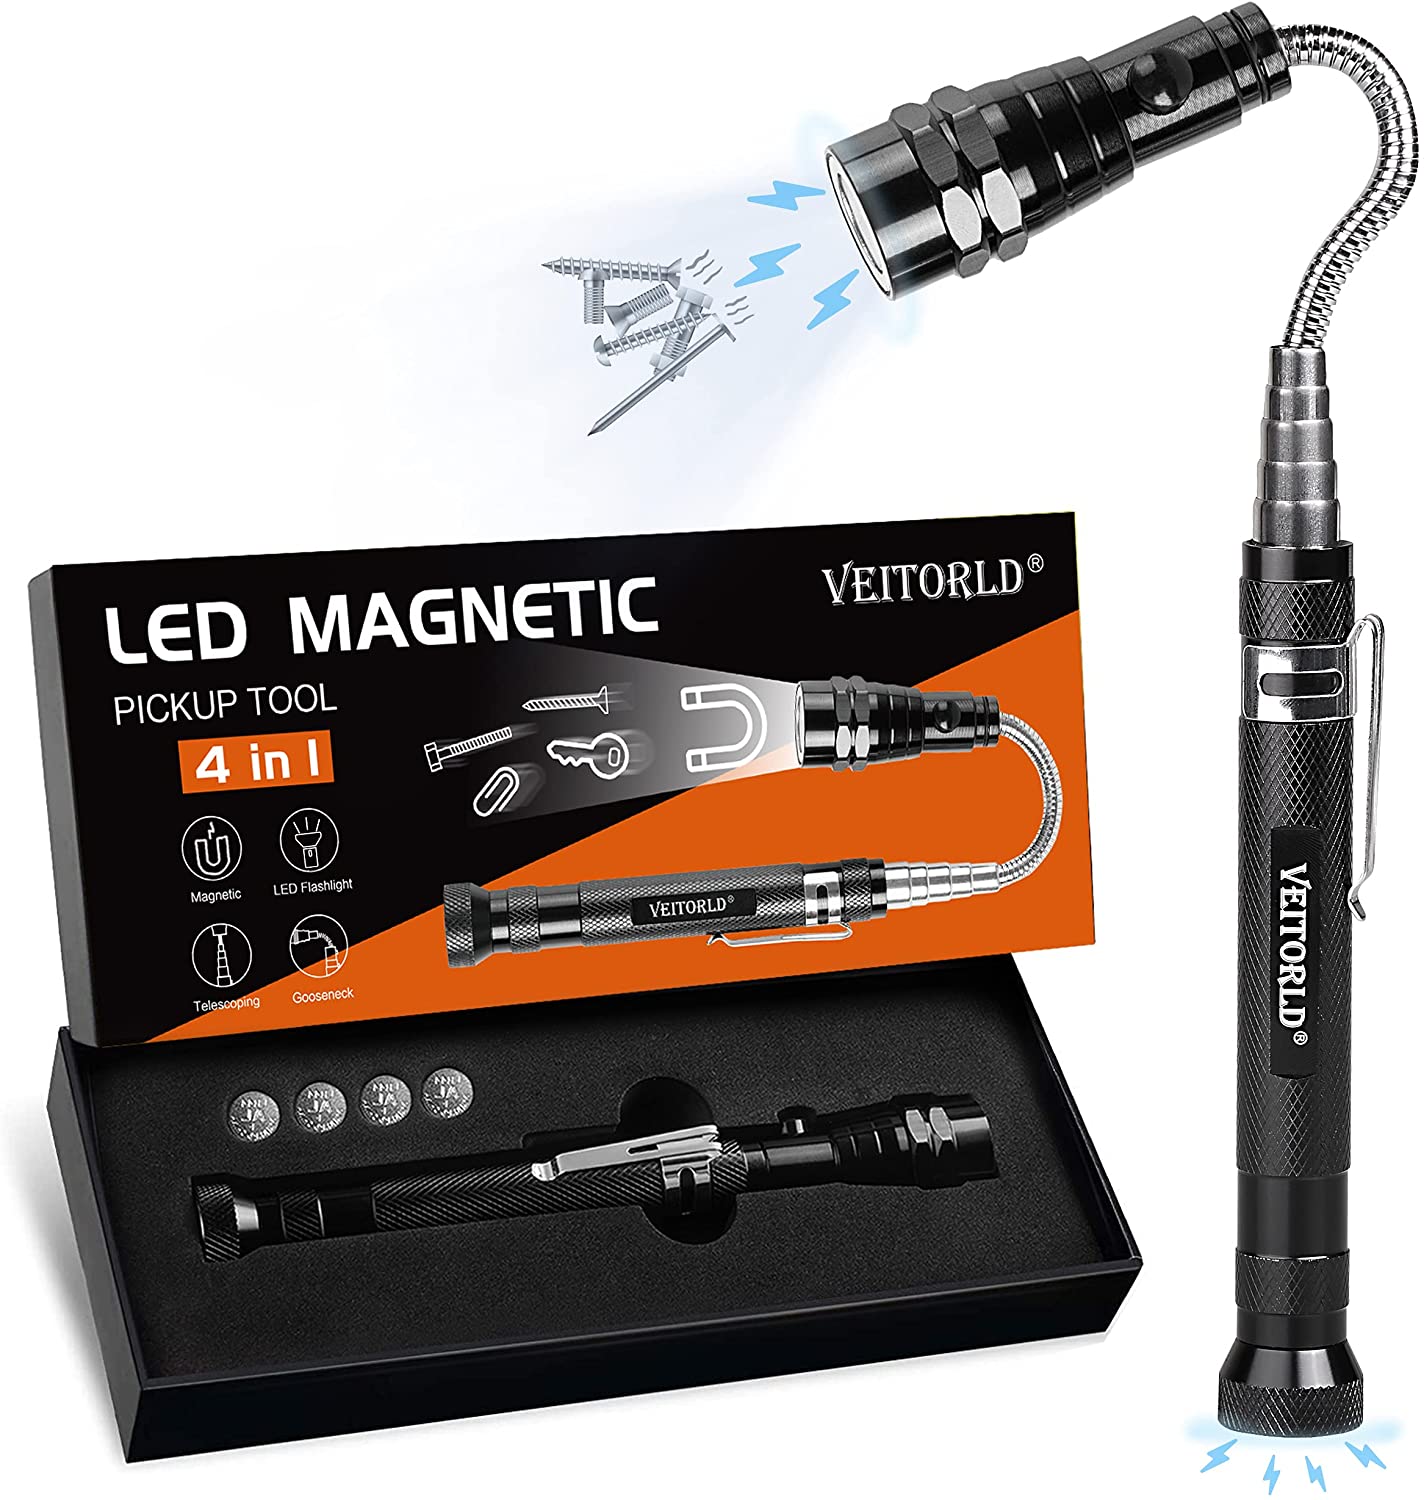 LED Telescopic Magnetic Pickup Tool, Father's Day Gift Guide 2022,